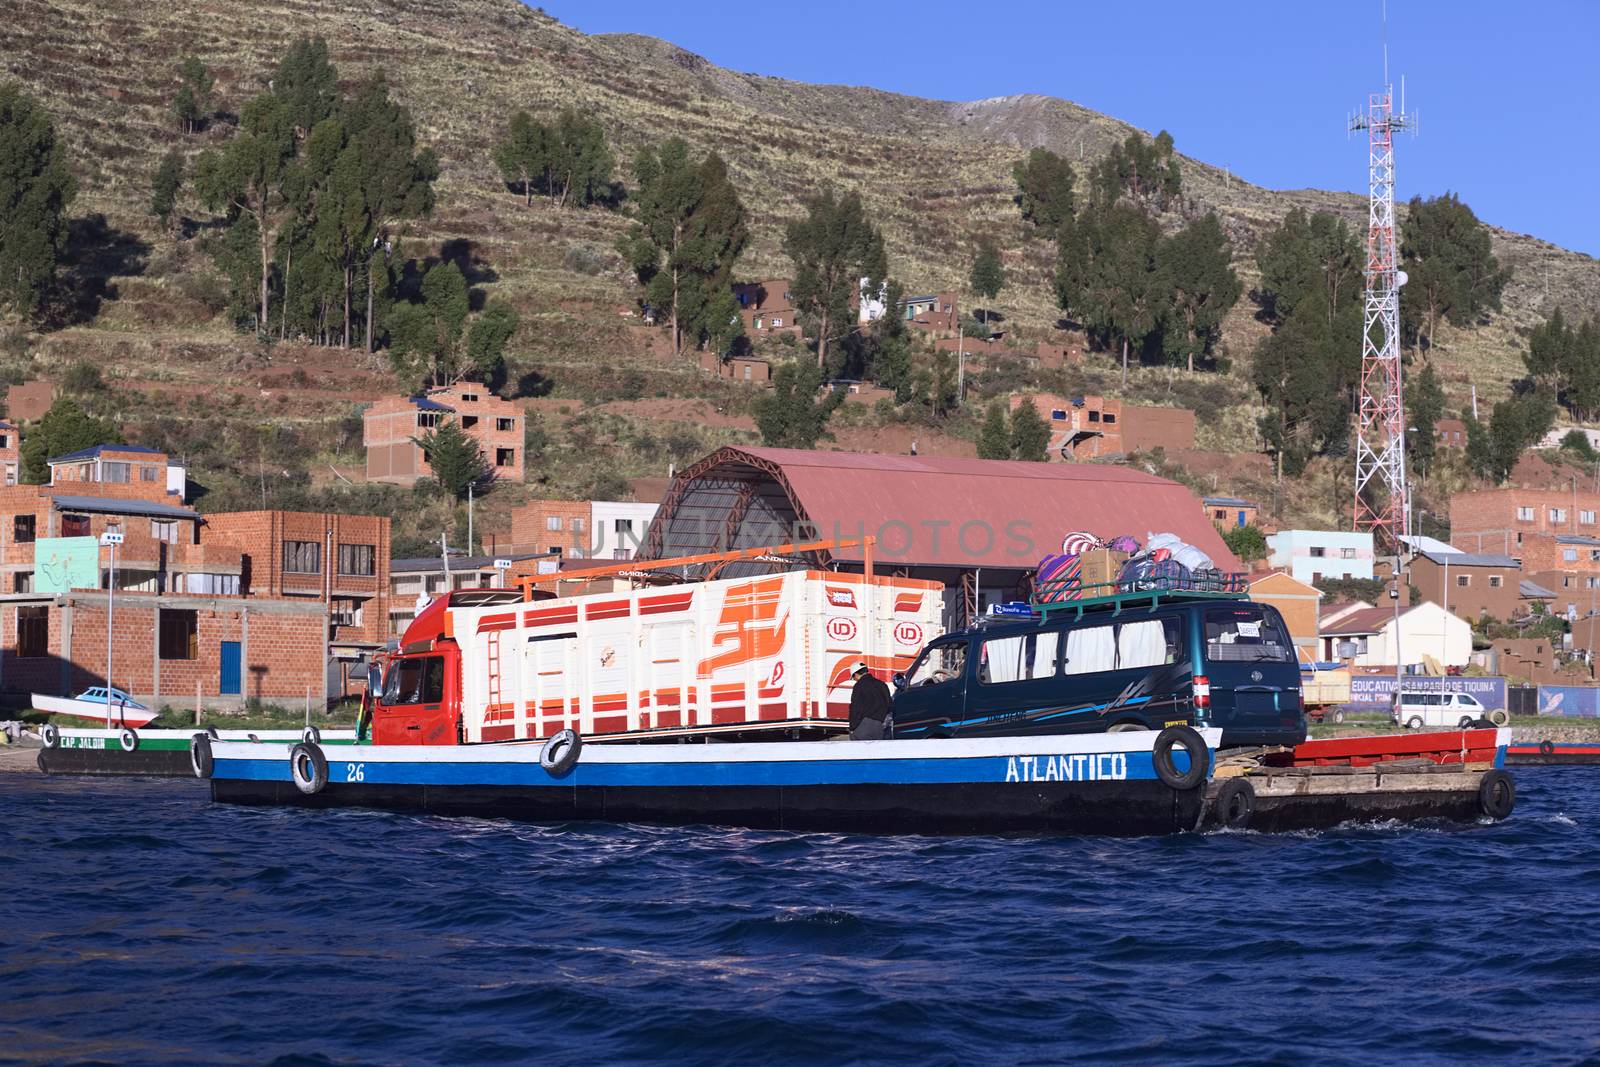 TIQUINA, BOLIVIA - OCTOBER 16, 2014: Wooden ferry loaded with truck and minibus crossing the Strait of Tiquina at Lake Titicaca on October 16, 2014 in San Pablo de Tiquina, Bolivia